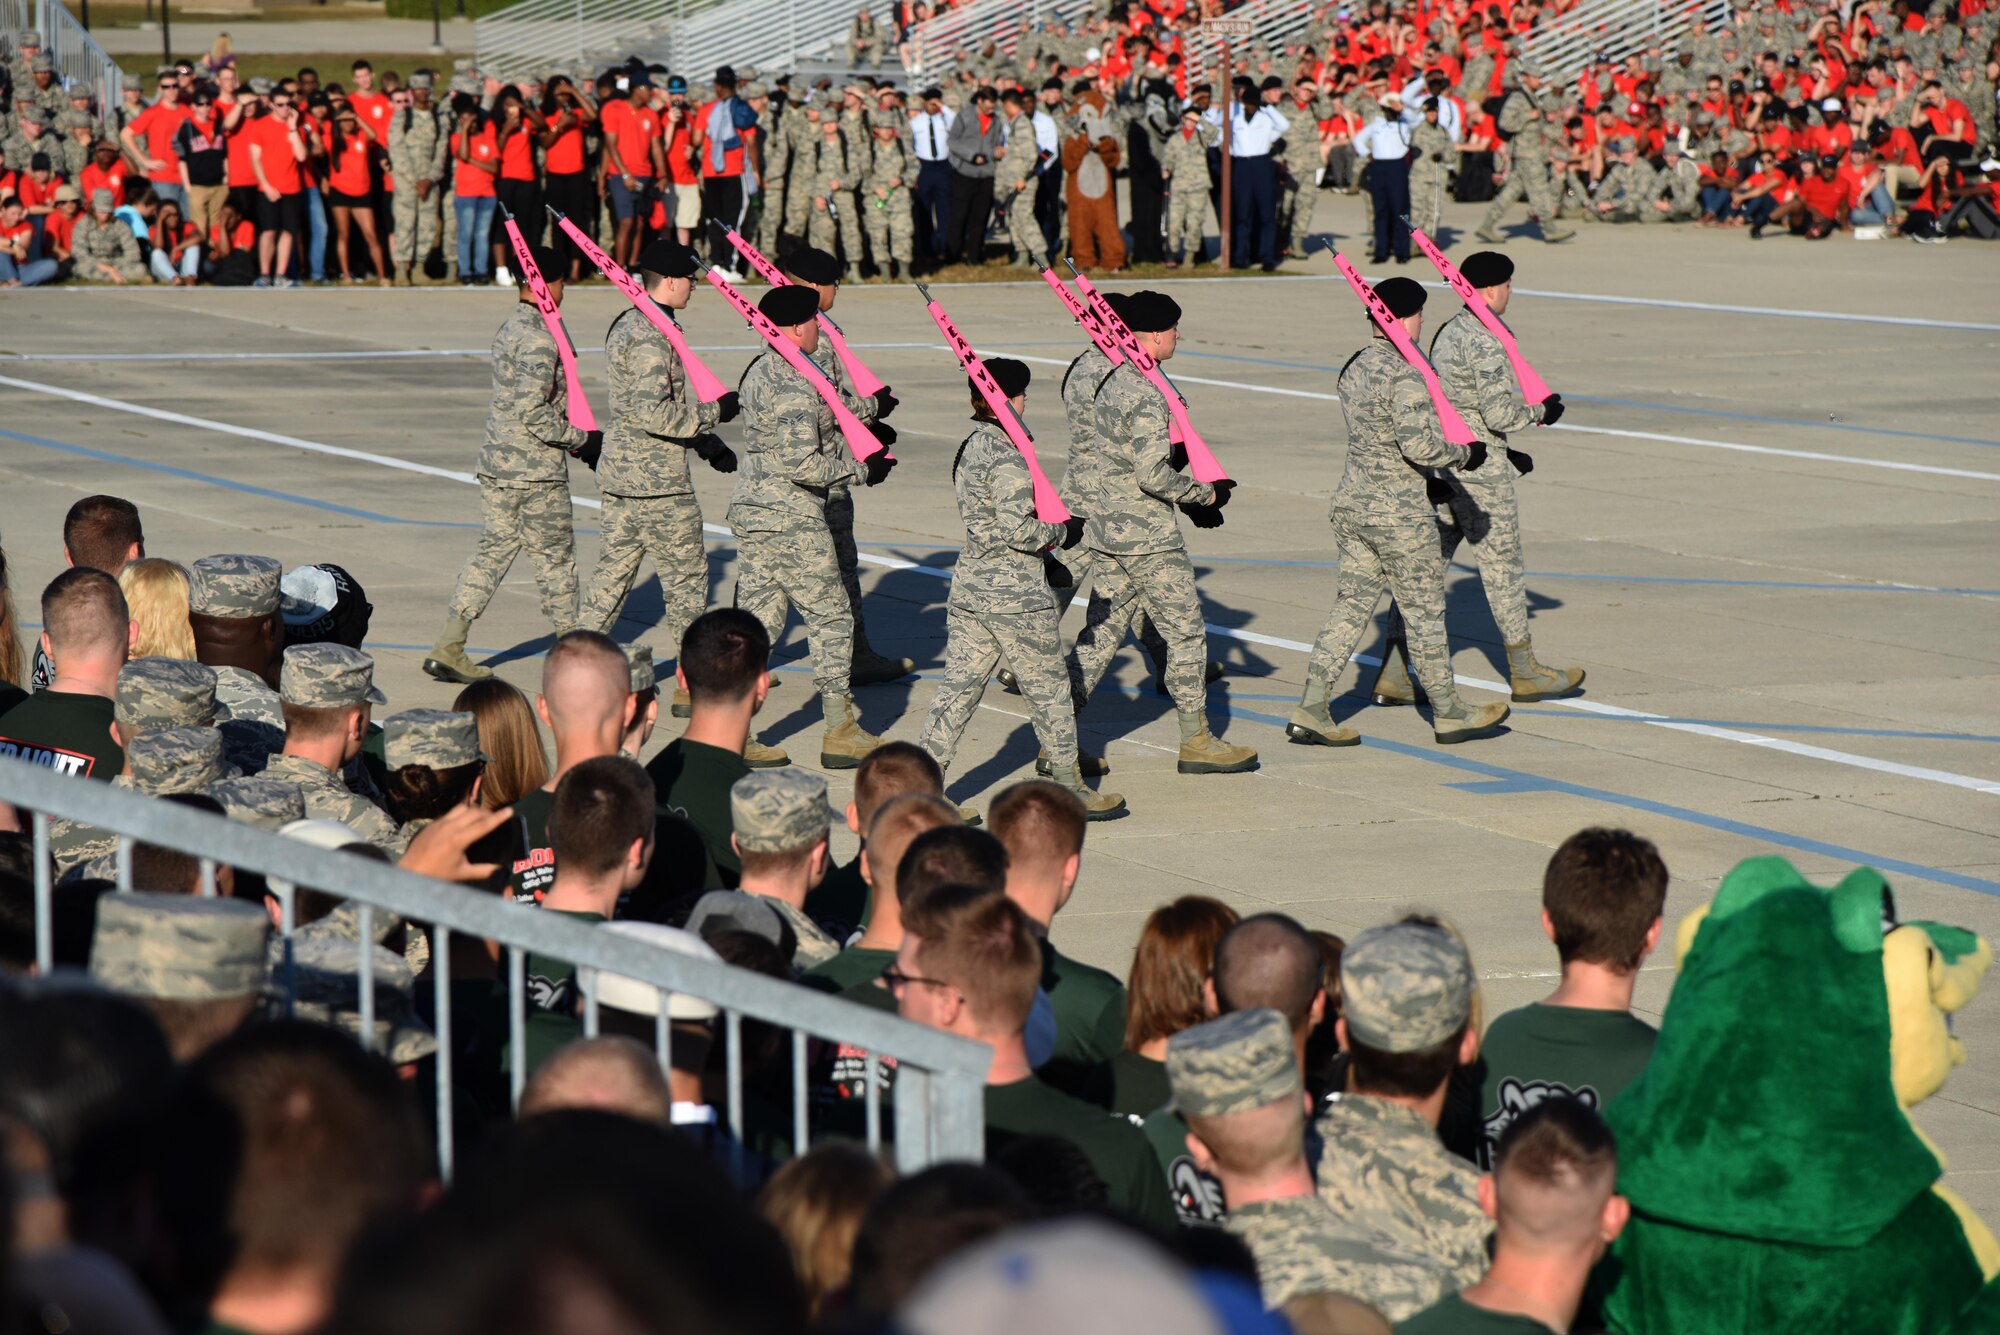 Members of the 334th Training Squadron freestyle drill team perform during the 81st Training Group drill down at the Levitow Training Support Facility drill pad Nov. 4, 2016, on Keesler Air Force Base, Miss. The quarterly drill down featured an open ranks inspection, regulation drill routine and freestyle drill routine categories. The 81st TRG’s four non-prior service training squadrons competed in the competition, with the 334th TRS “Gators” taking home the overall first place. (U.S. Air Force photo by Kemberly Groue/Released)